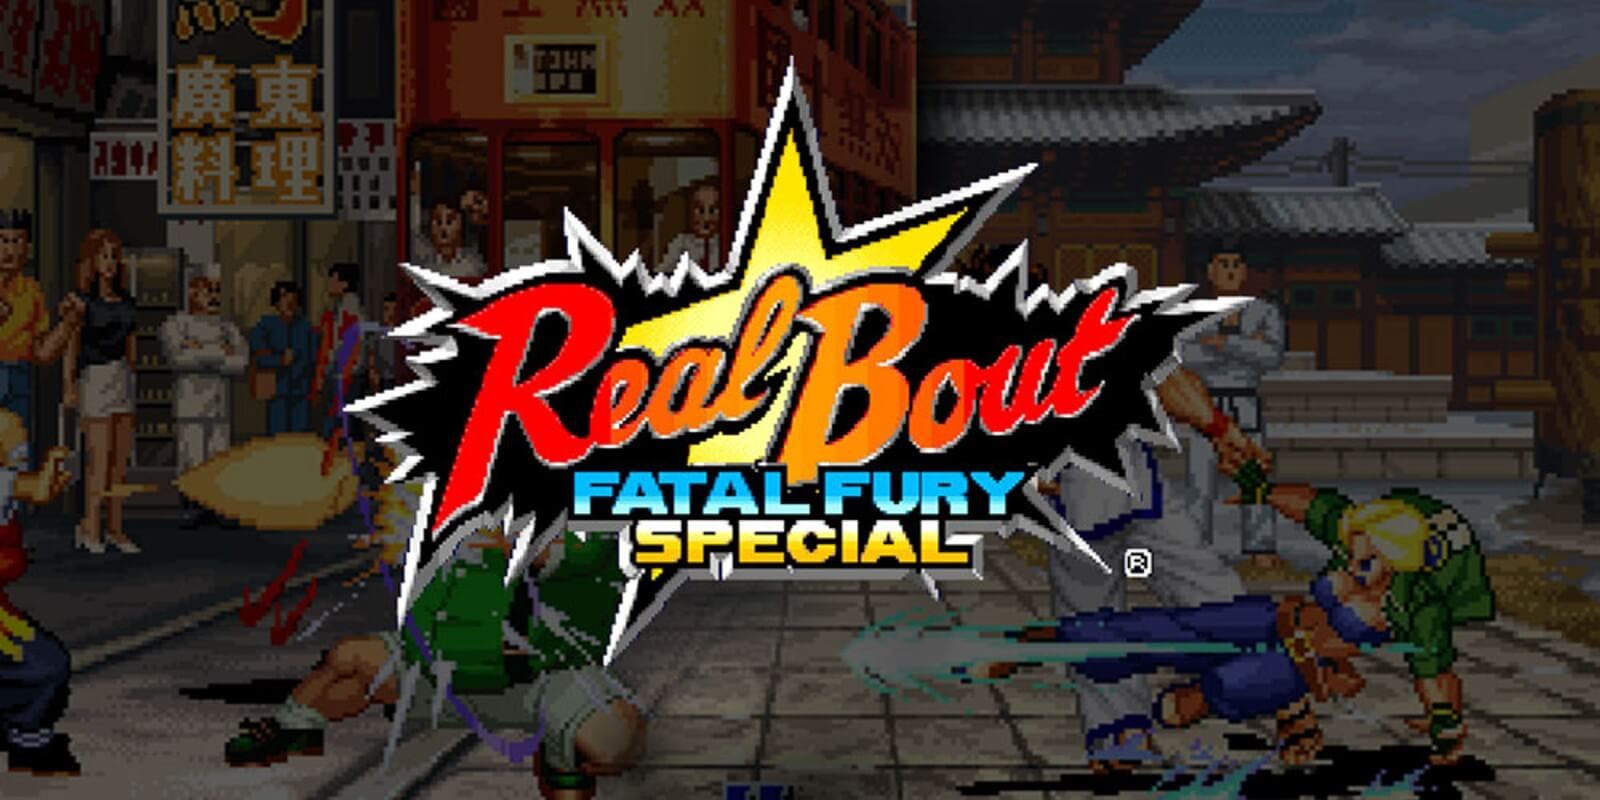 Real Bout Fatal Fury Special Out Now For iOS And Android